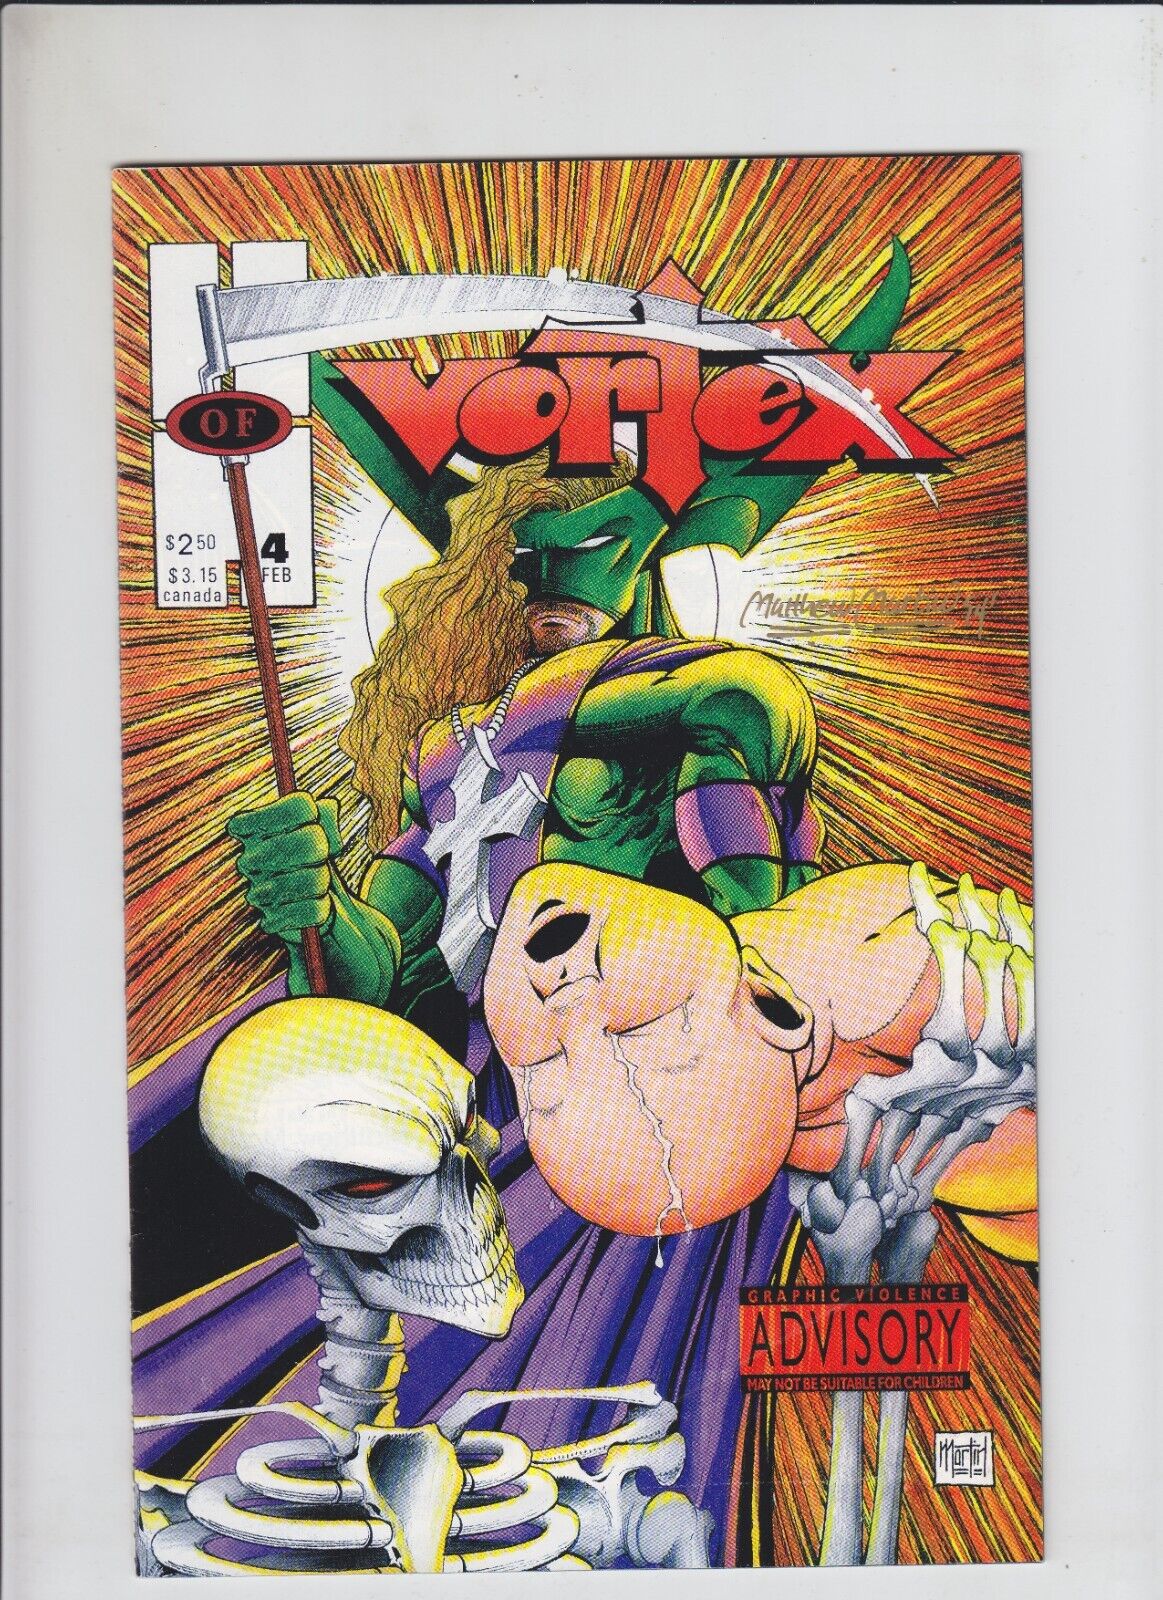 Vortex #4 VF- Hall of Heroes - SIGNED by Matthew Martin - Dr Kilbourn - 1994